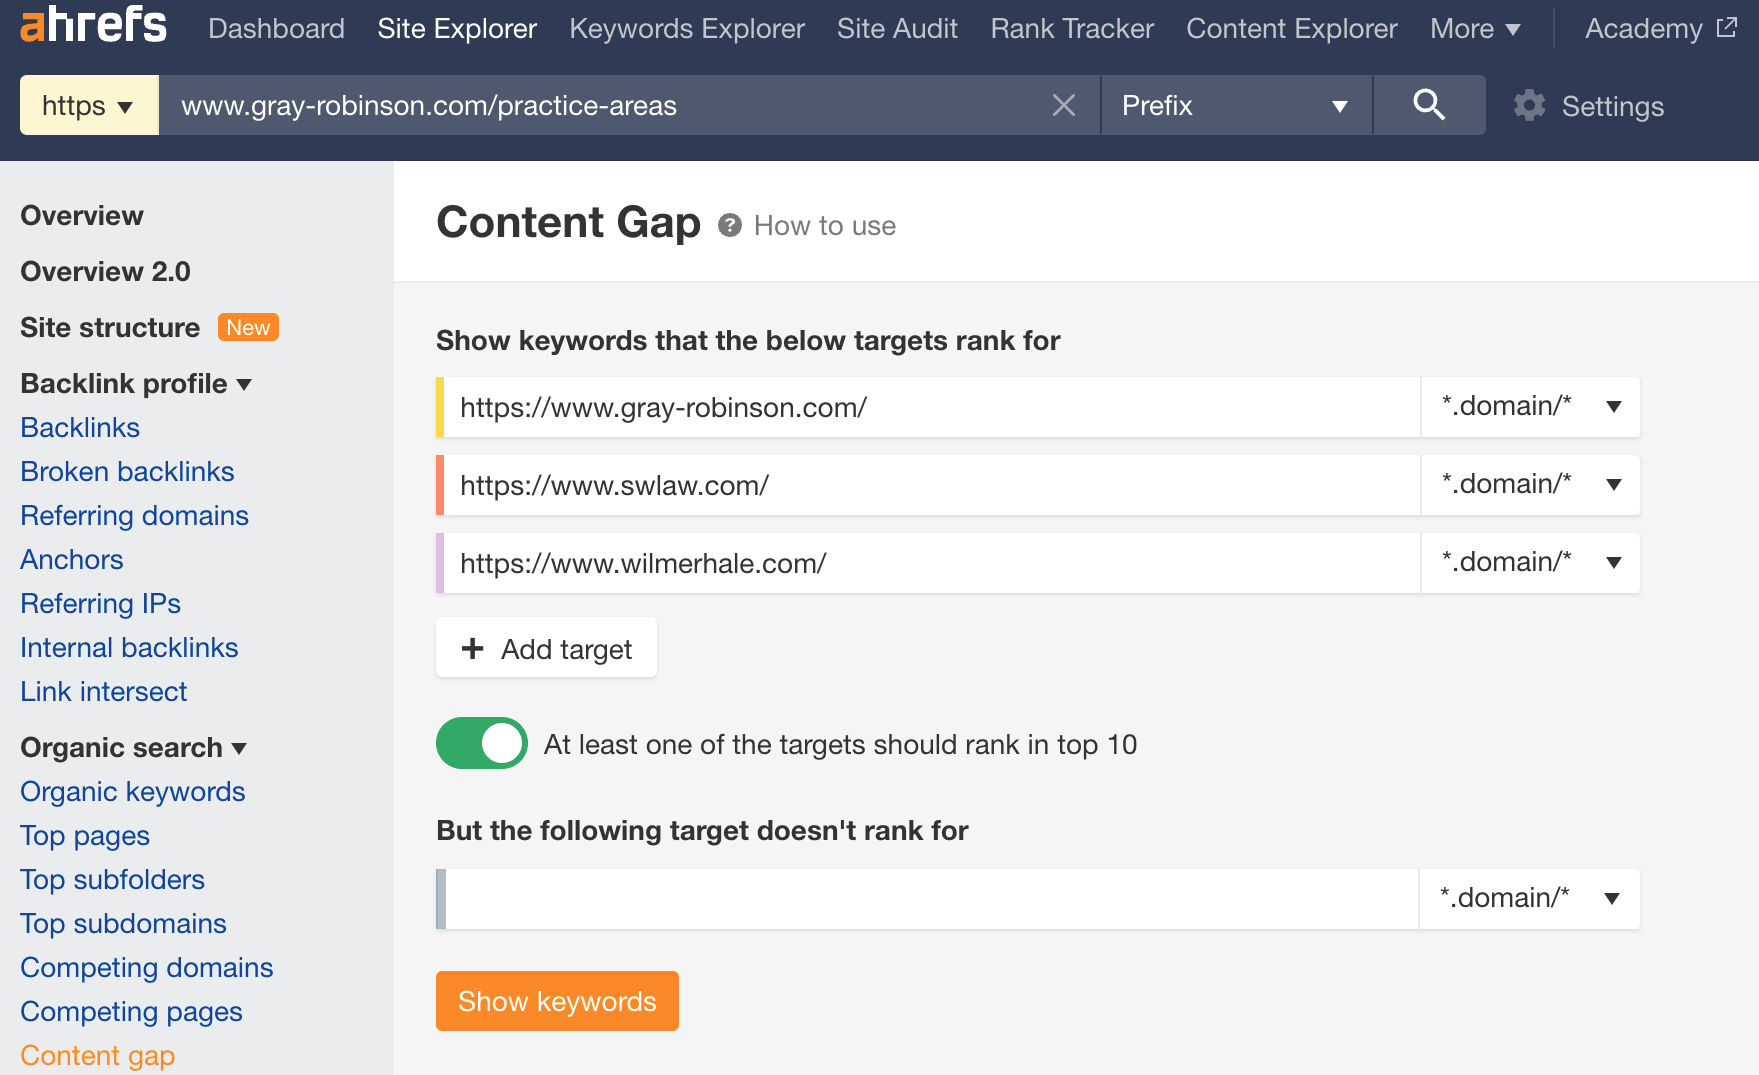 Setting up a Content Gap report in Site Explorer to show only competitors' keywords